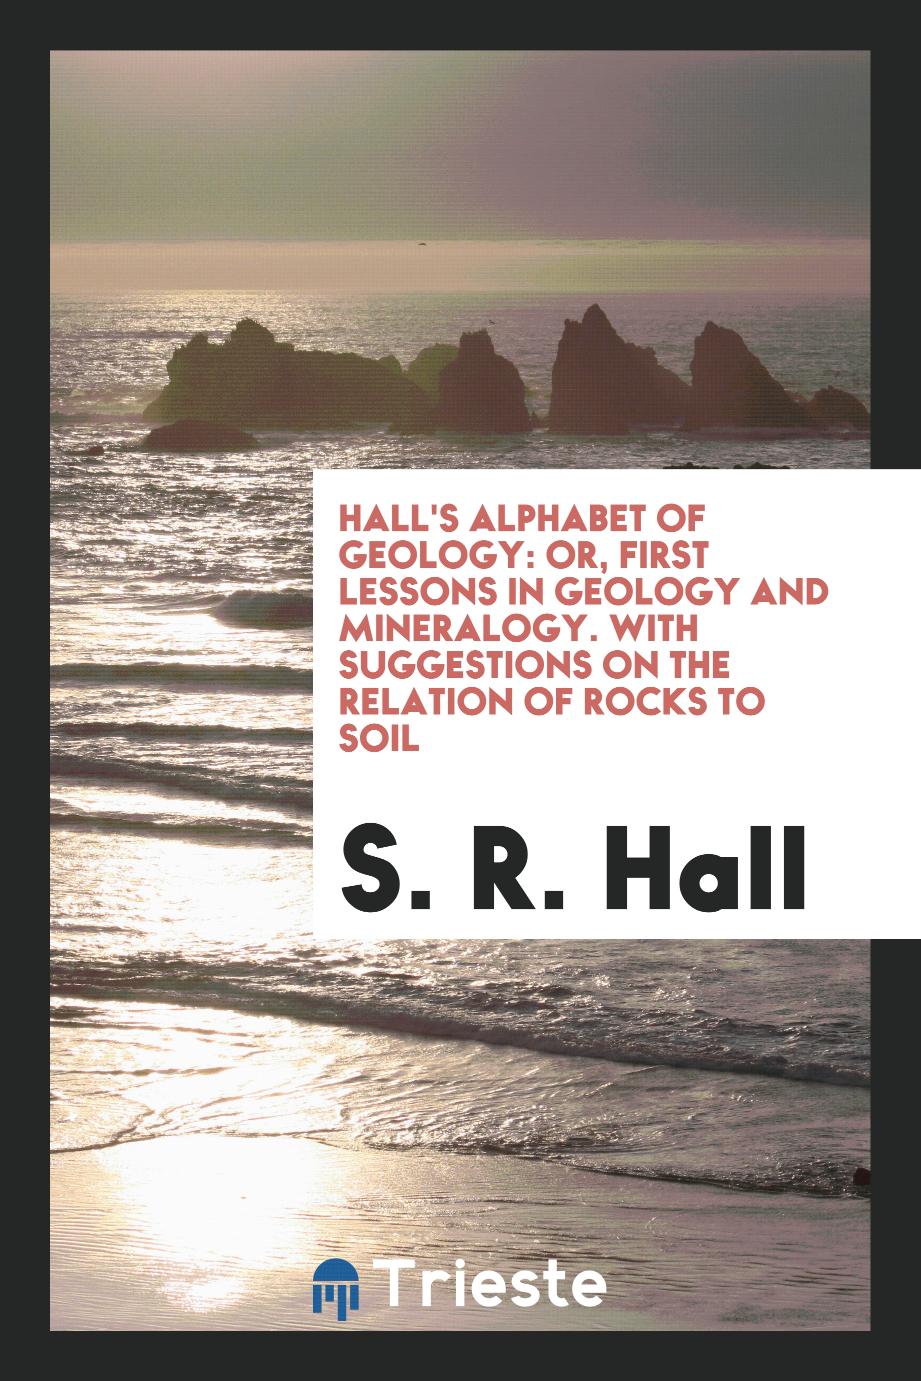 Hall's Alphabet of Geology: Or, First Lessons in Geology and Mineralogy. With Suggestions on the Relation of Rocks to Soil